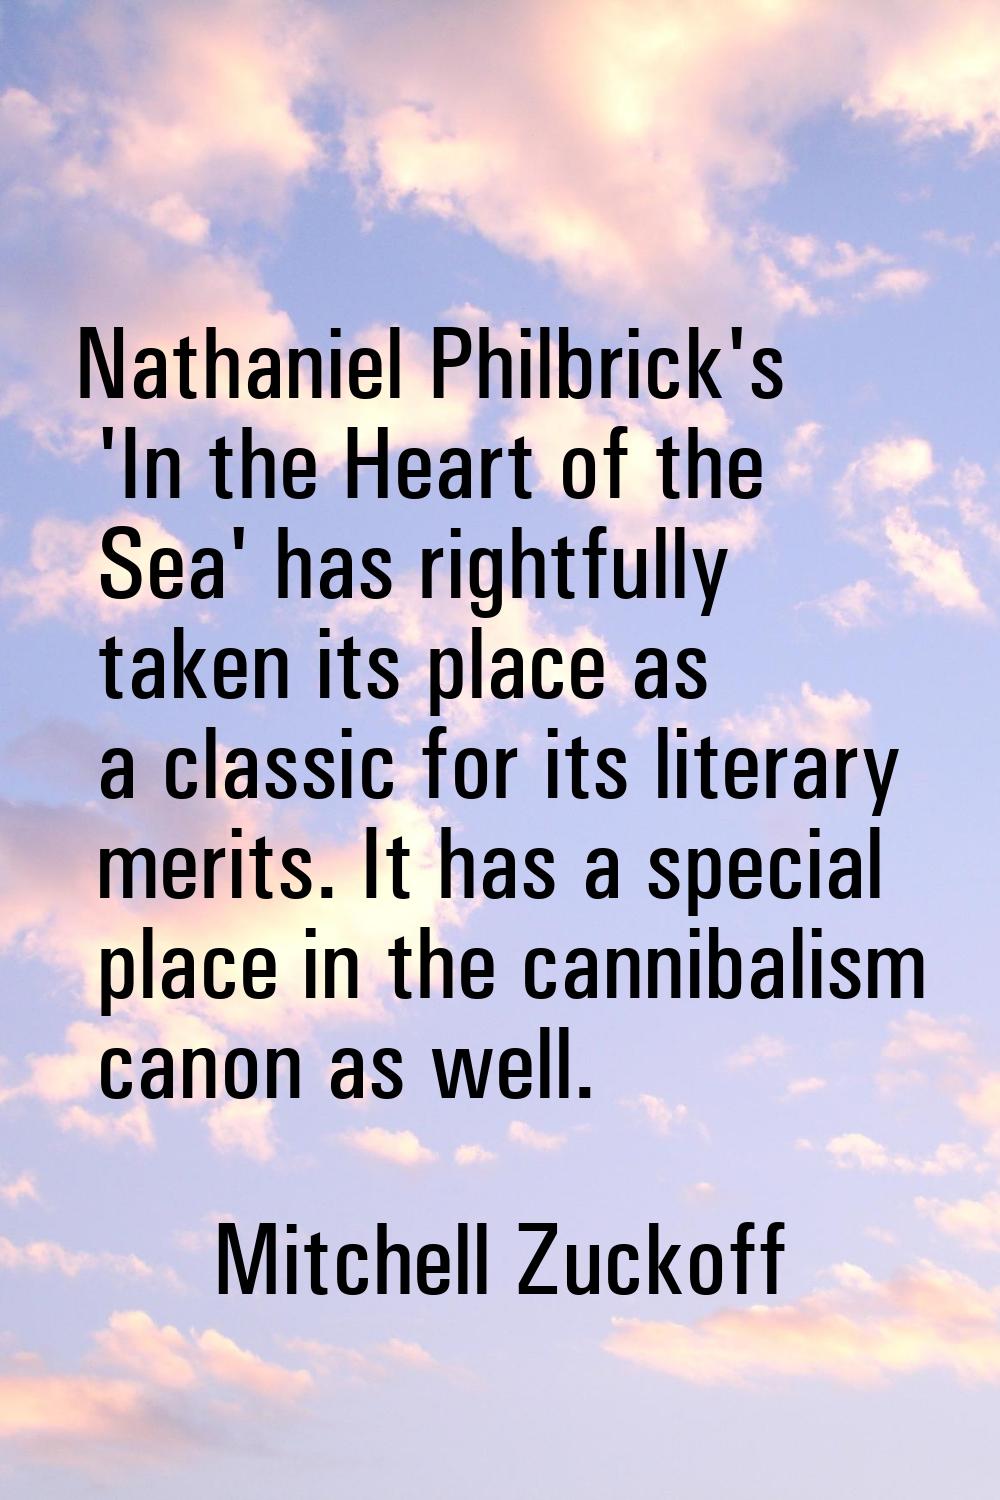 Nathaniel Philbrick's 'In the Heart of the Sea' has rightfully taken its place as a classic for its